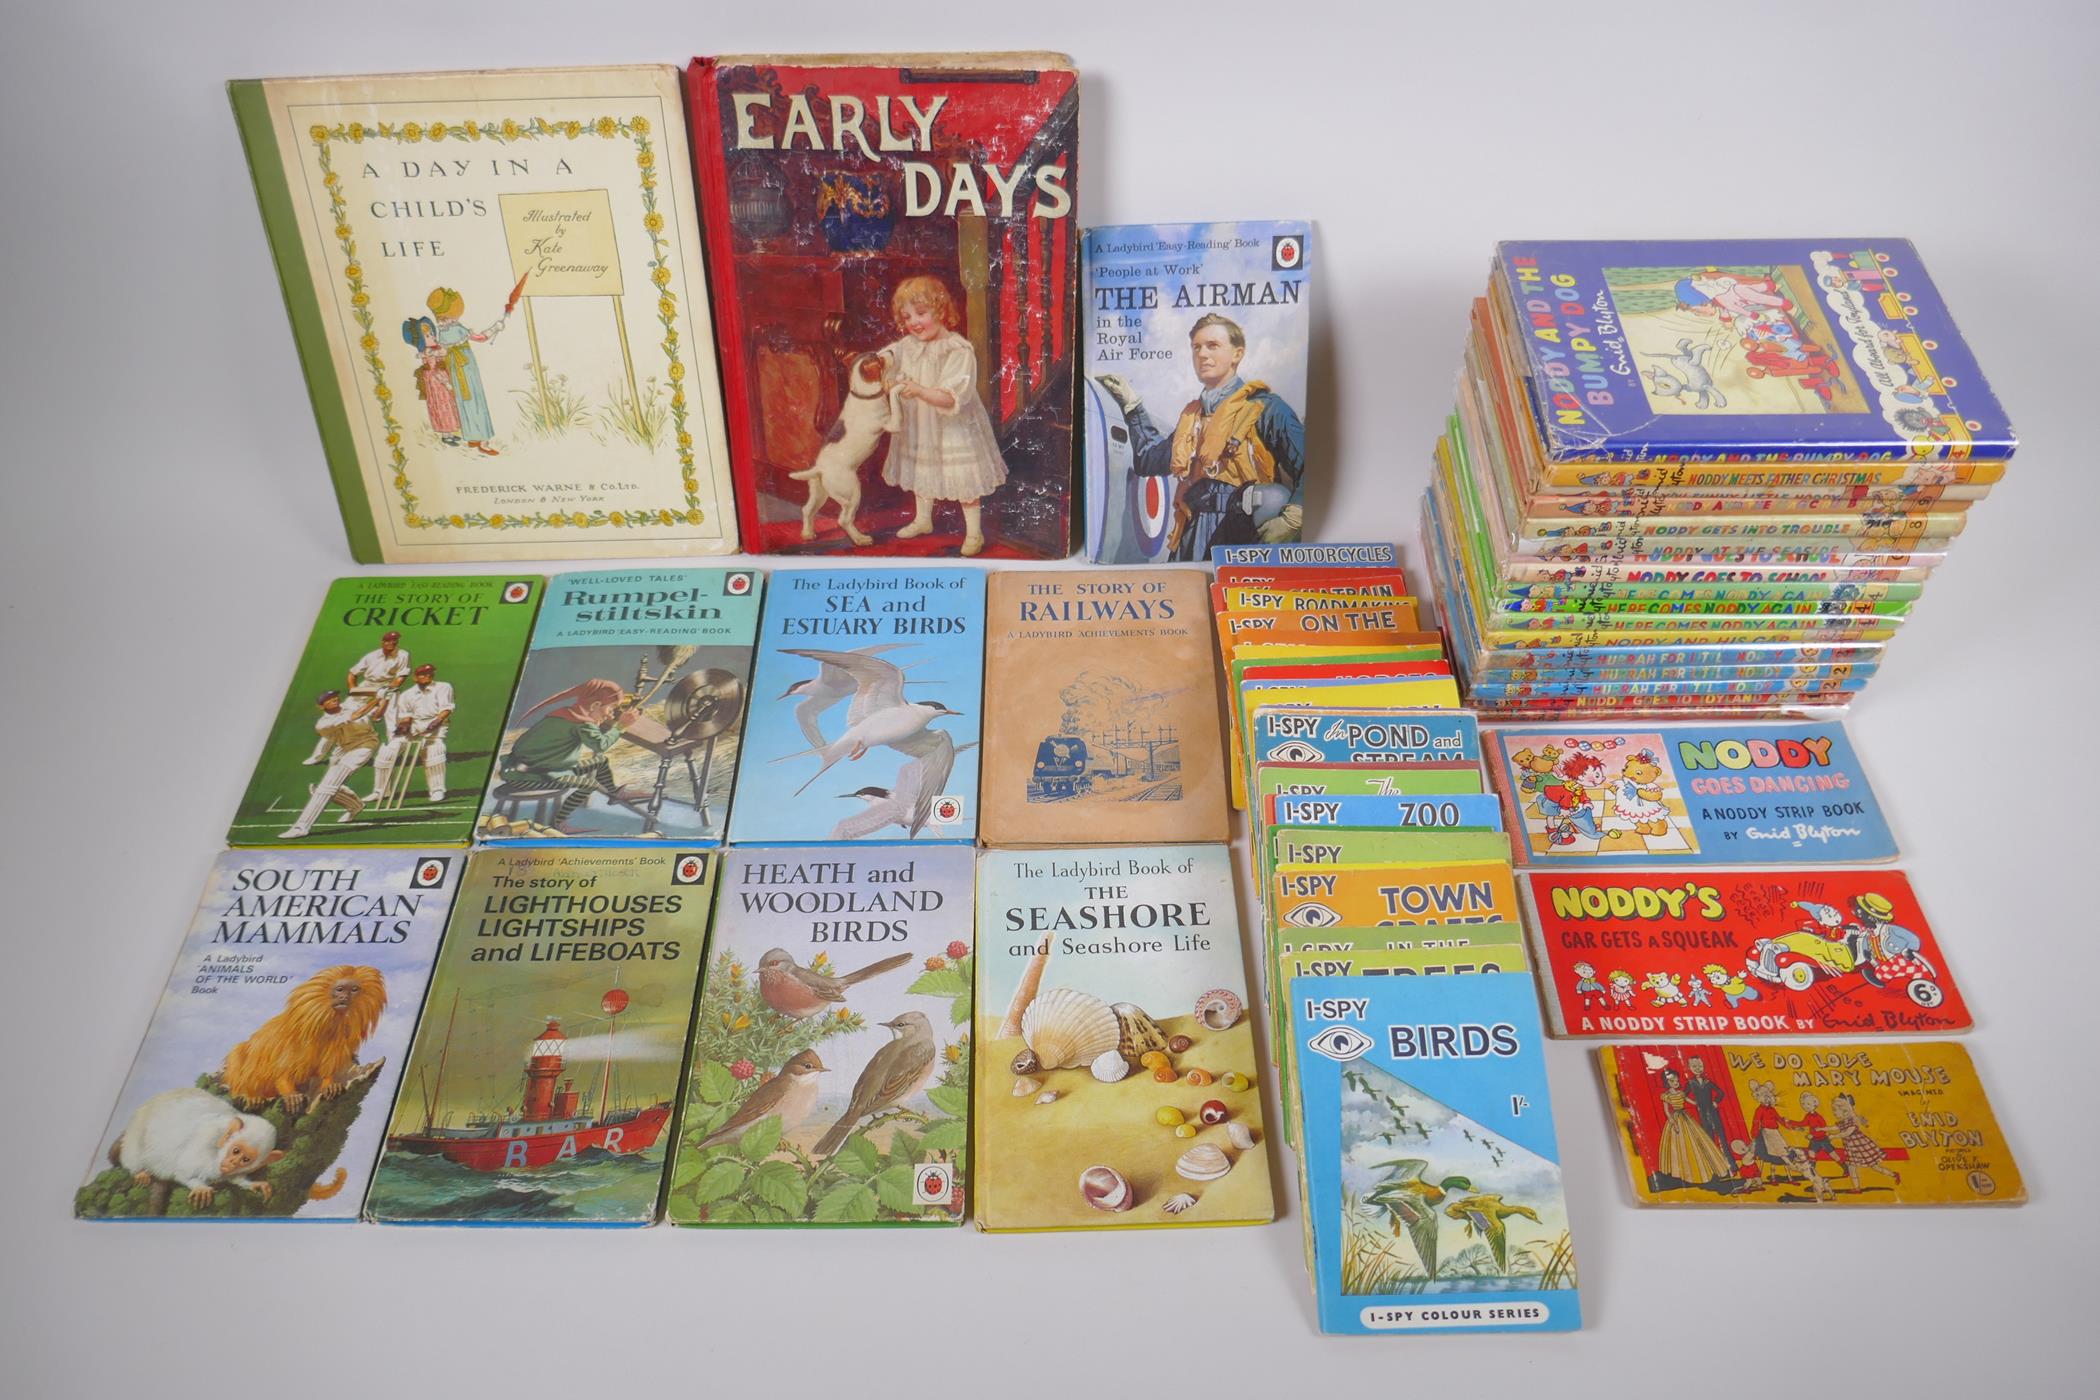 A collection of vintage children's books including various Noddy Volumes (1-14, many duplicates),